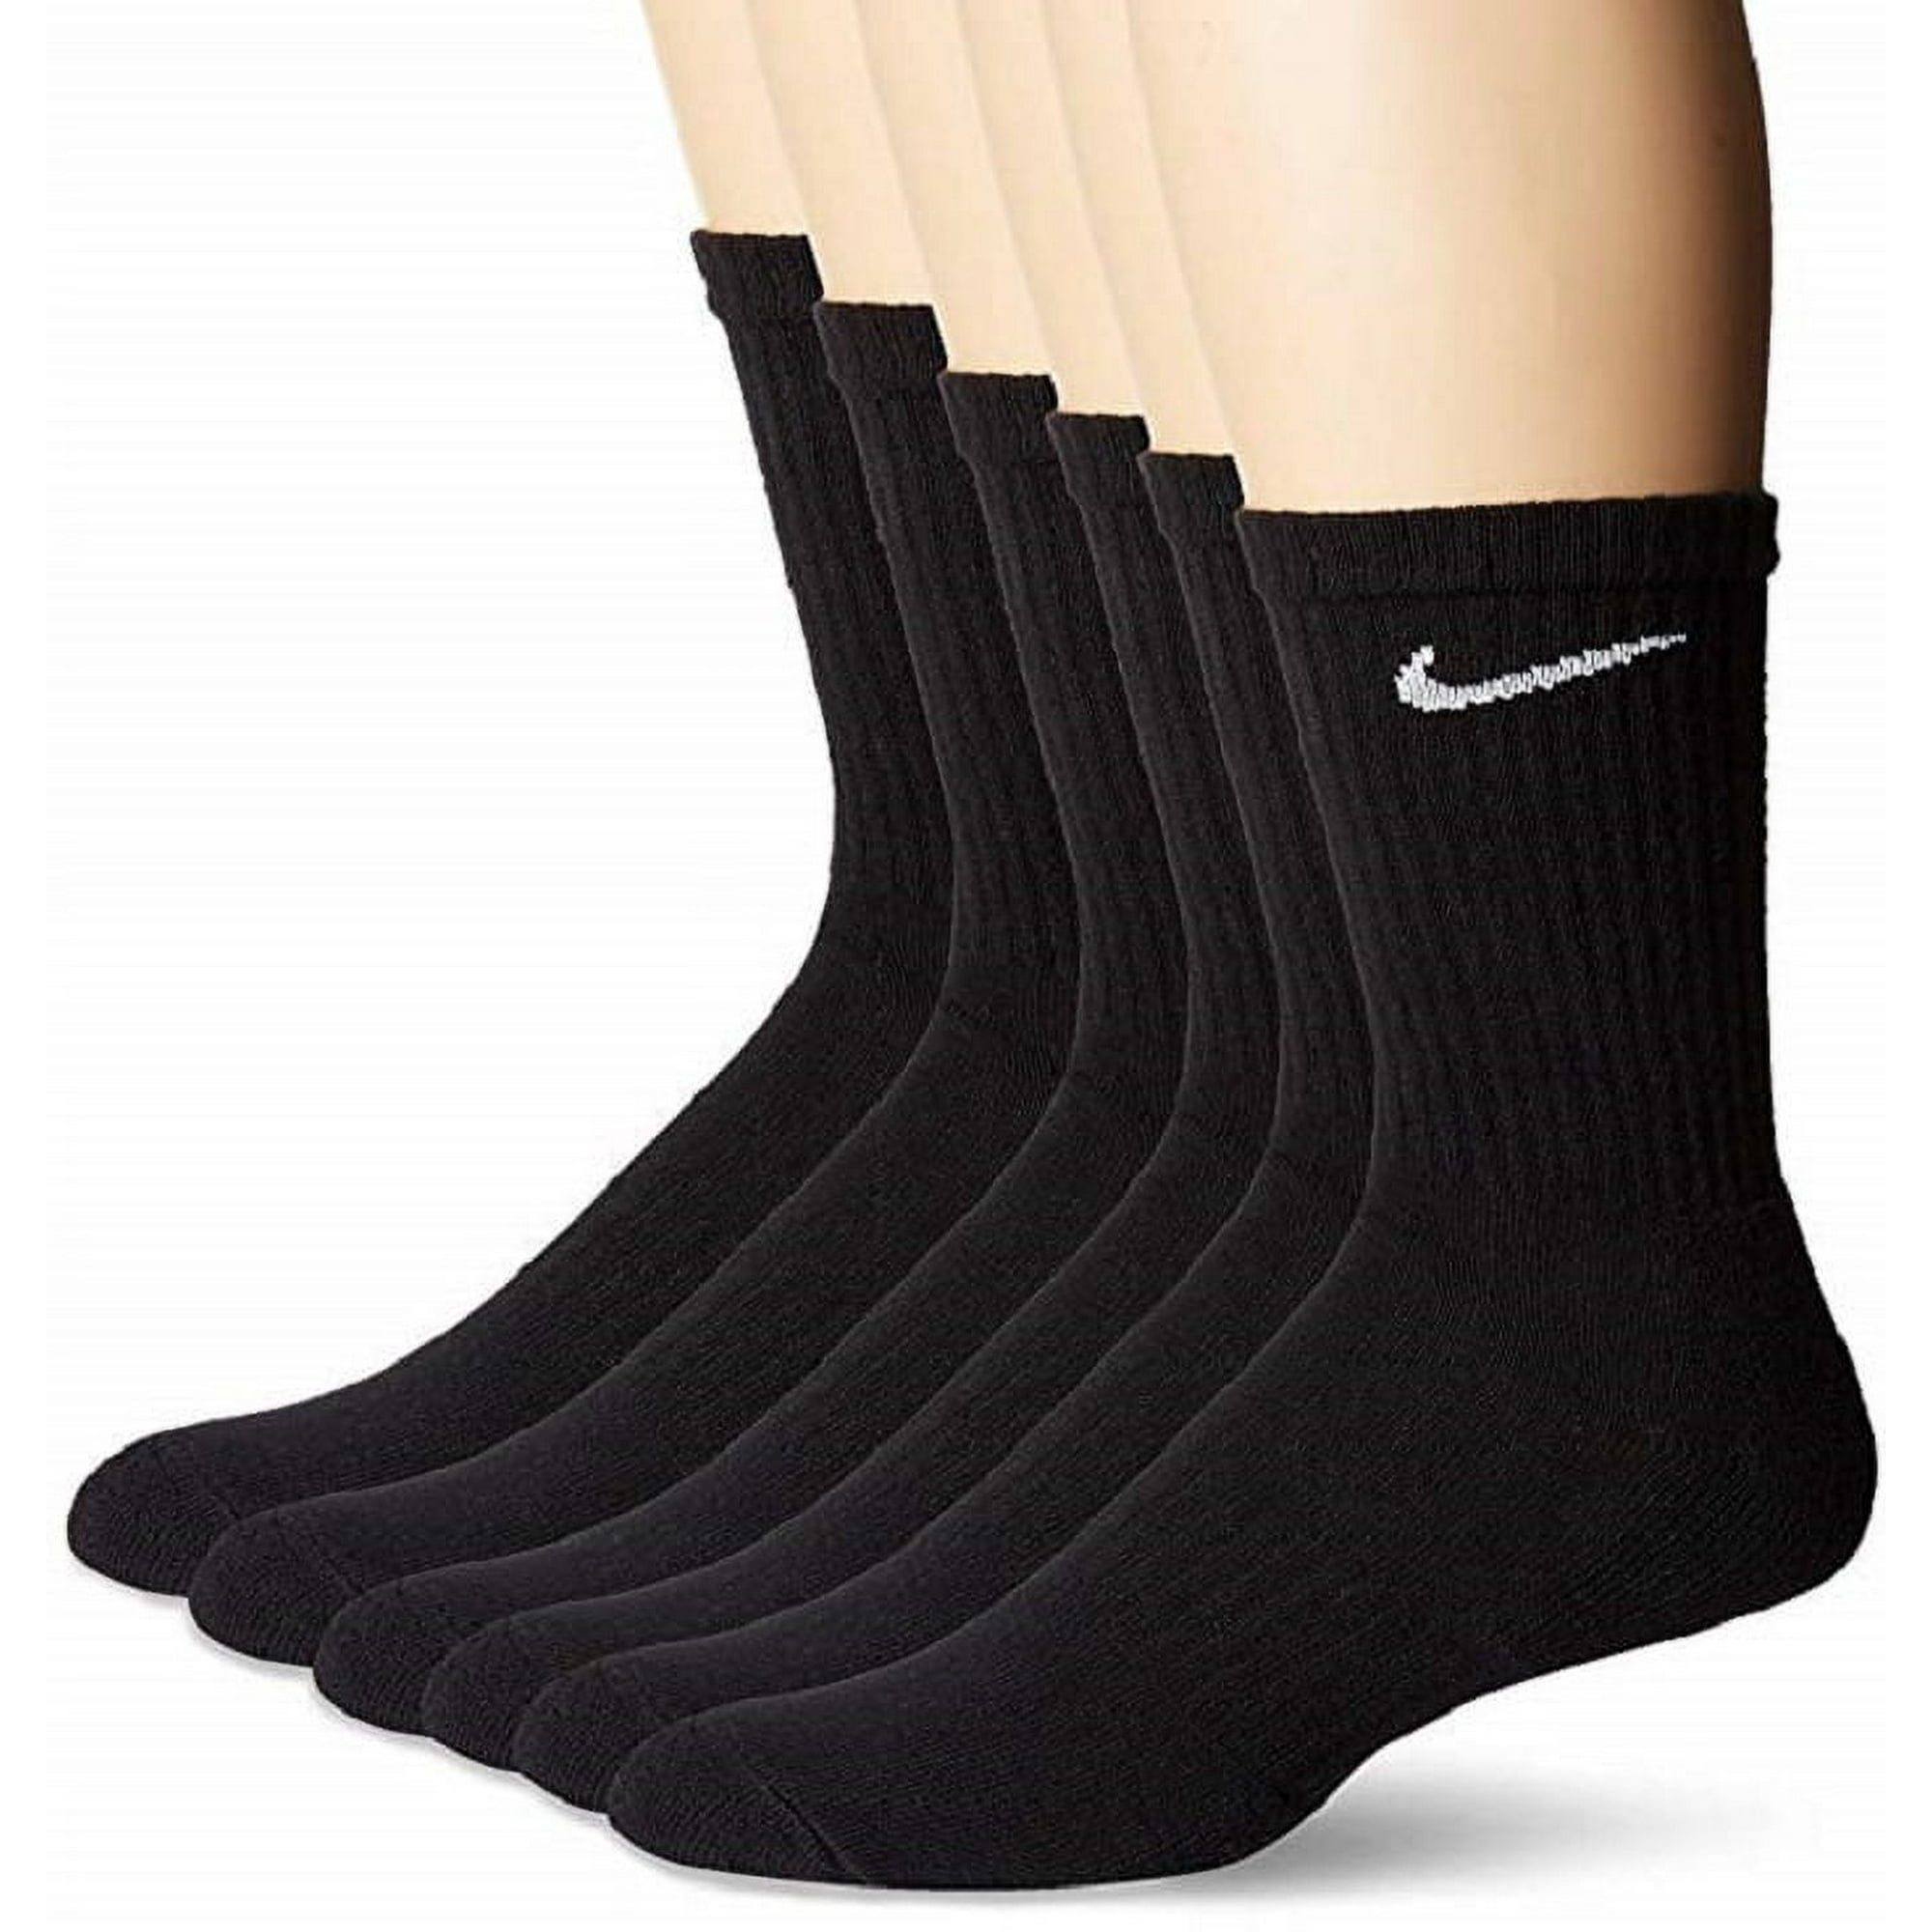 Nike Unisex Everyday Cotton Cushioned Crew Training Socks with DRI-FIT Technology, Large (Pack of 6 Pairs) - Walmart.com